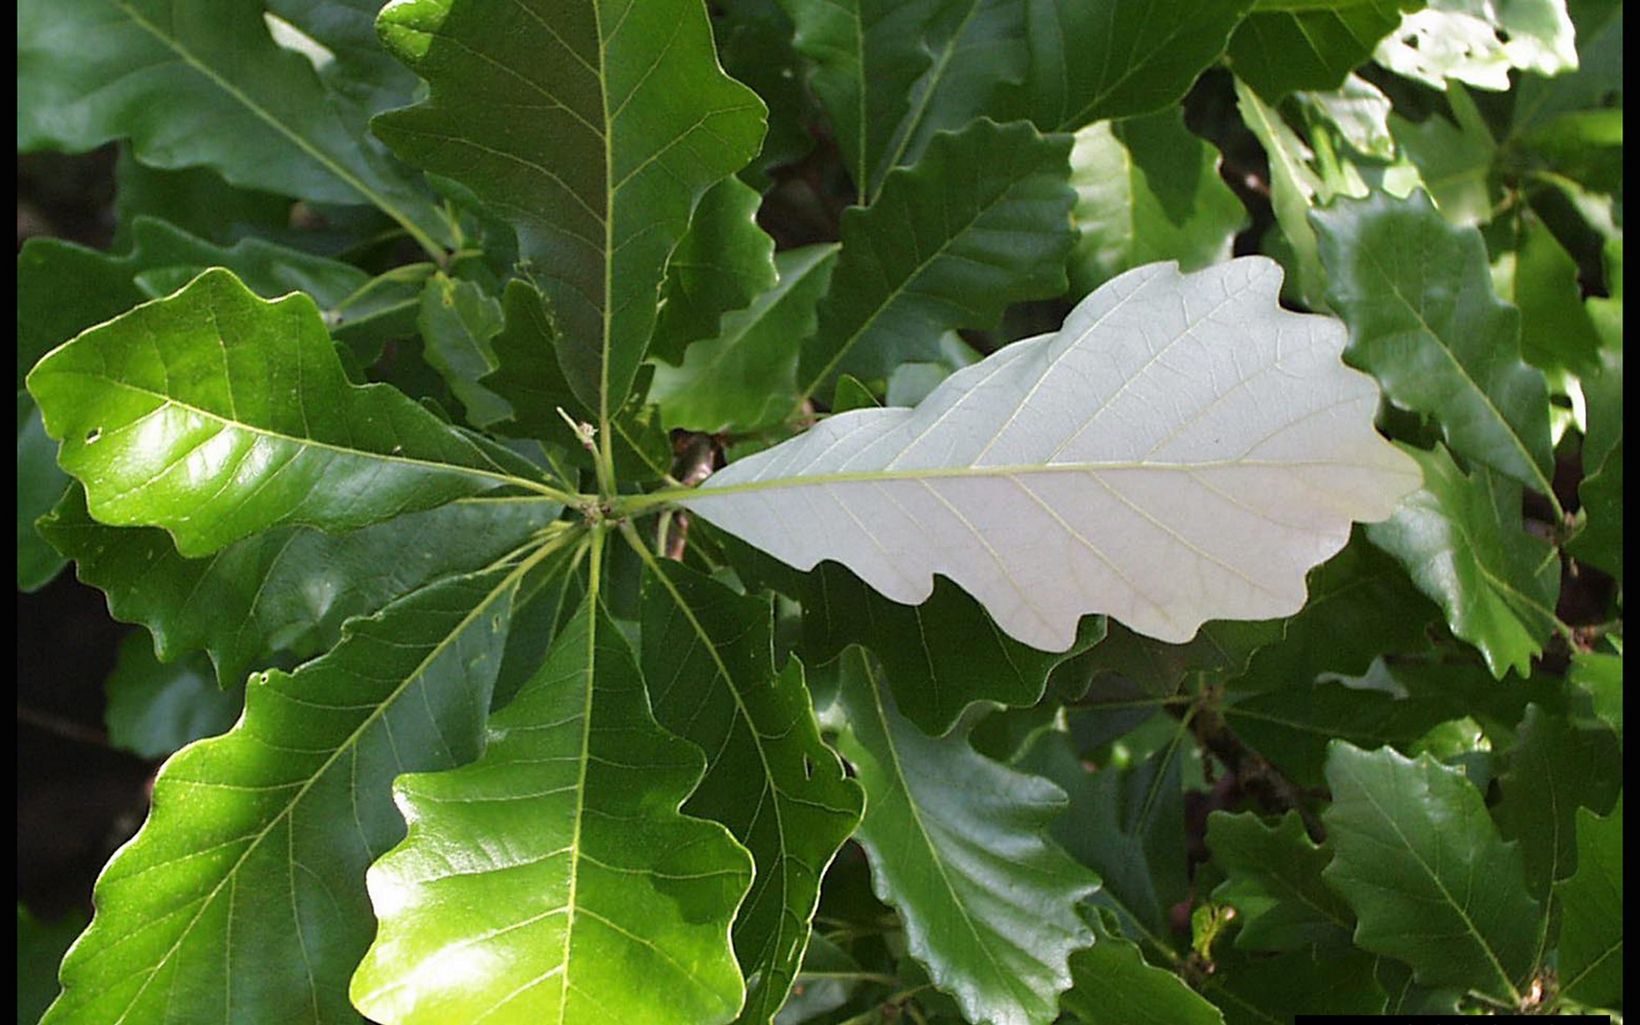 Close-up view of swamp white oak leaves.